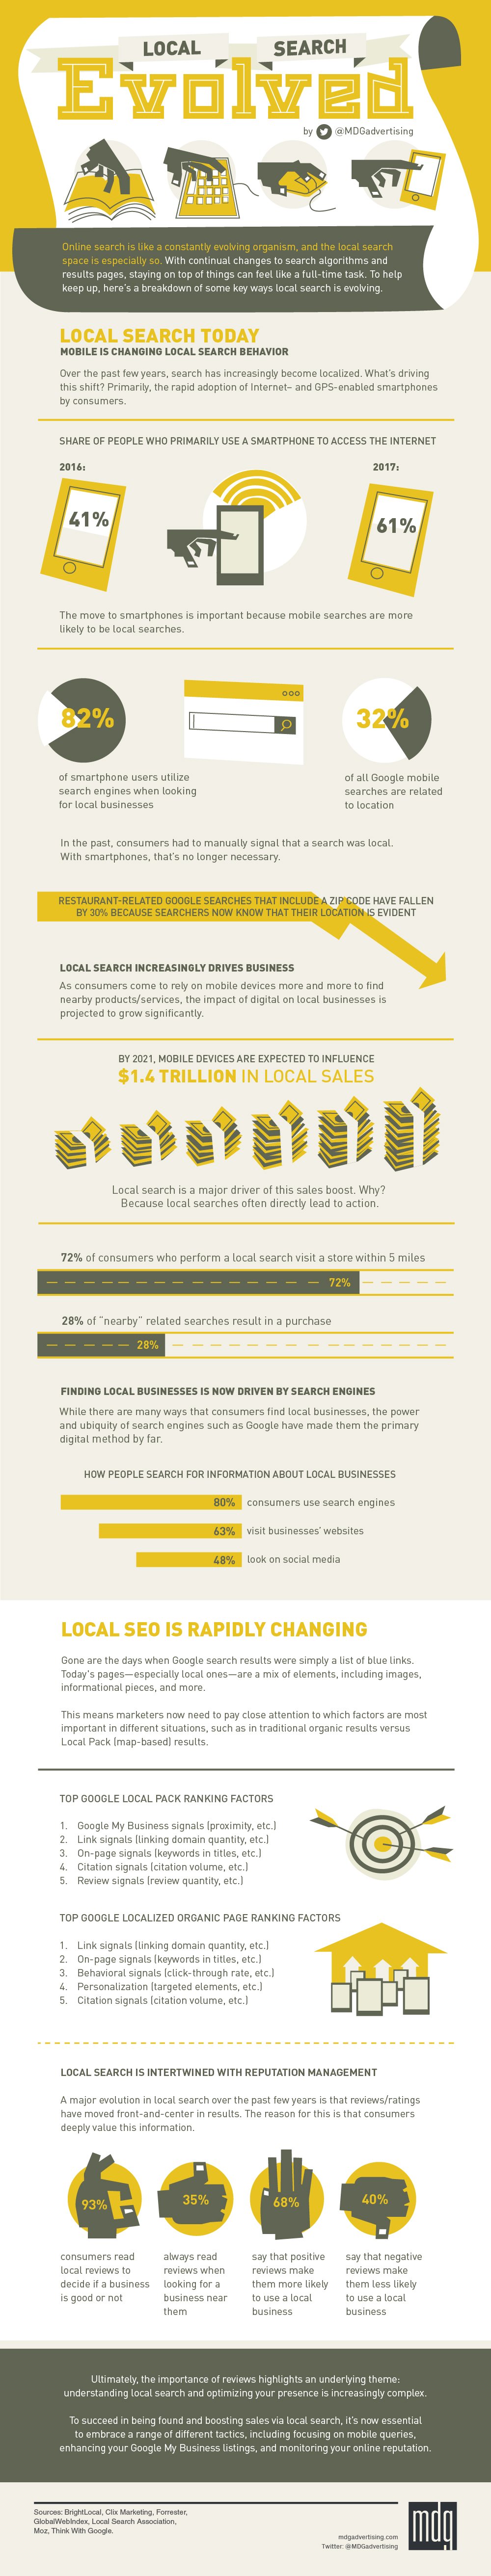 Local Search Evolved [Infographic]